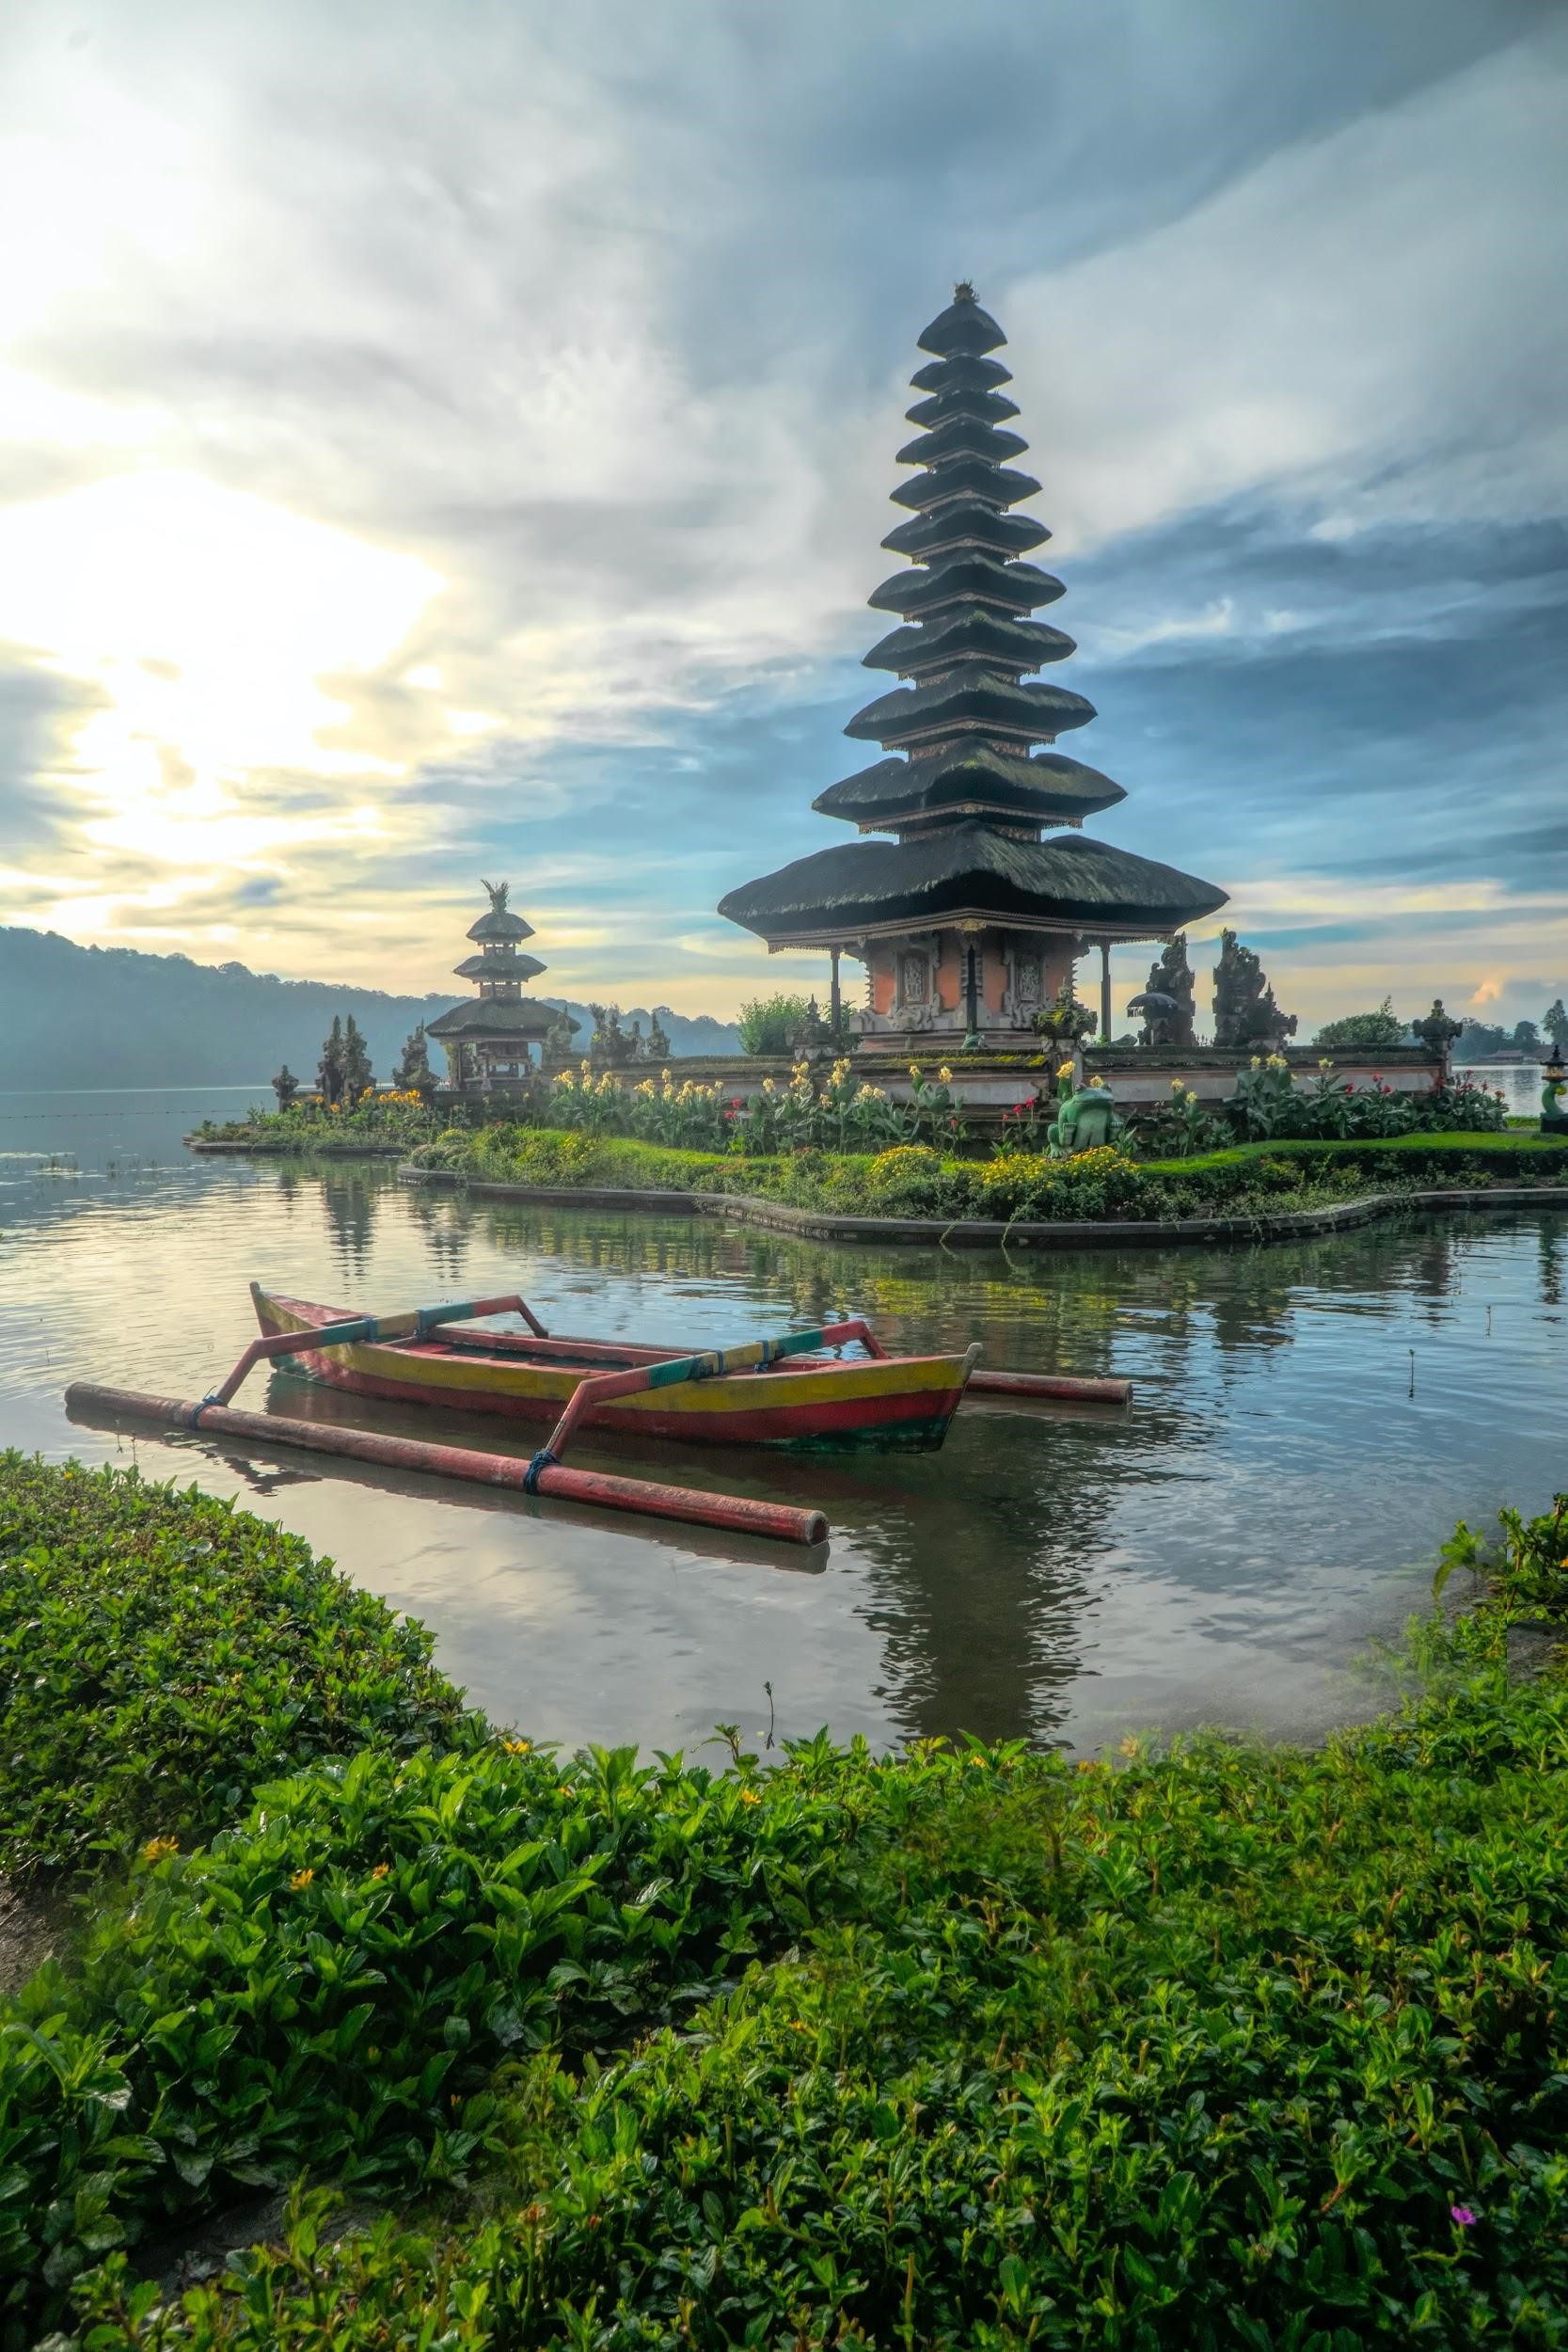 Image of Temple in Bali